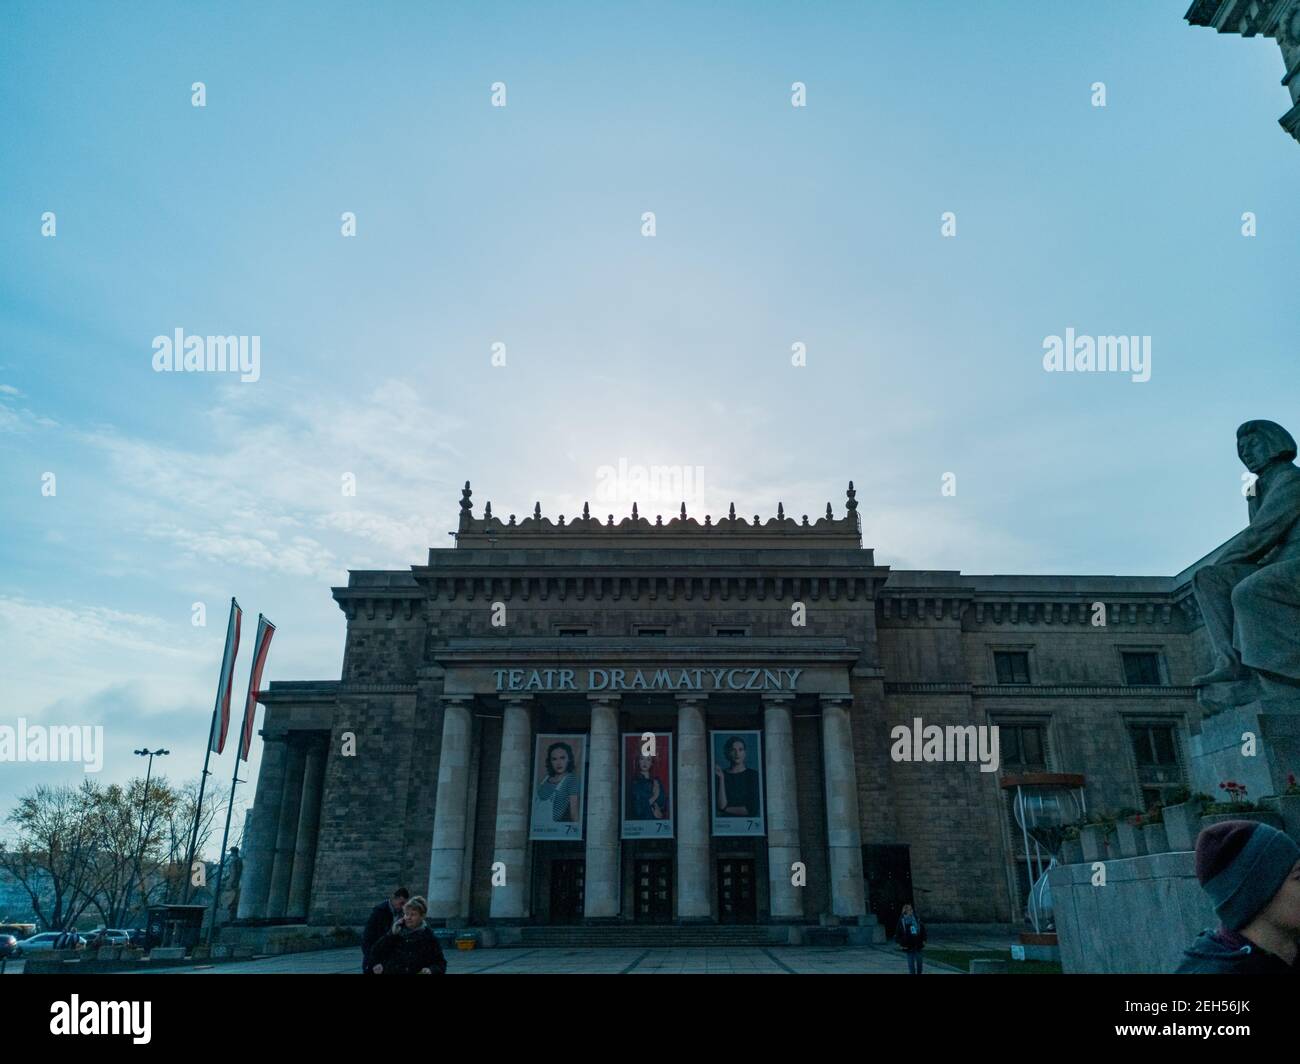 Warsaw November 10 2019 Dramatic theater as part of Palace of Culture and Science in the morning Stock Photo